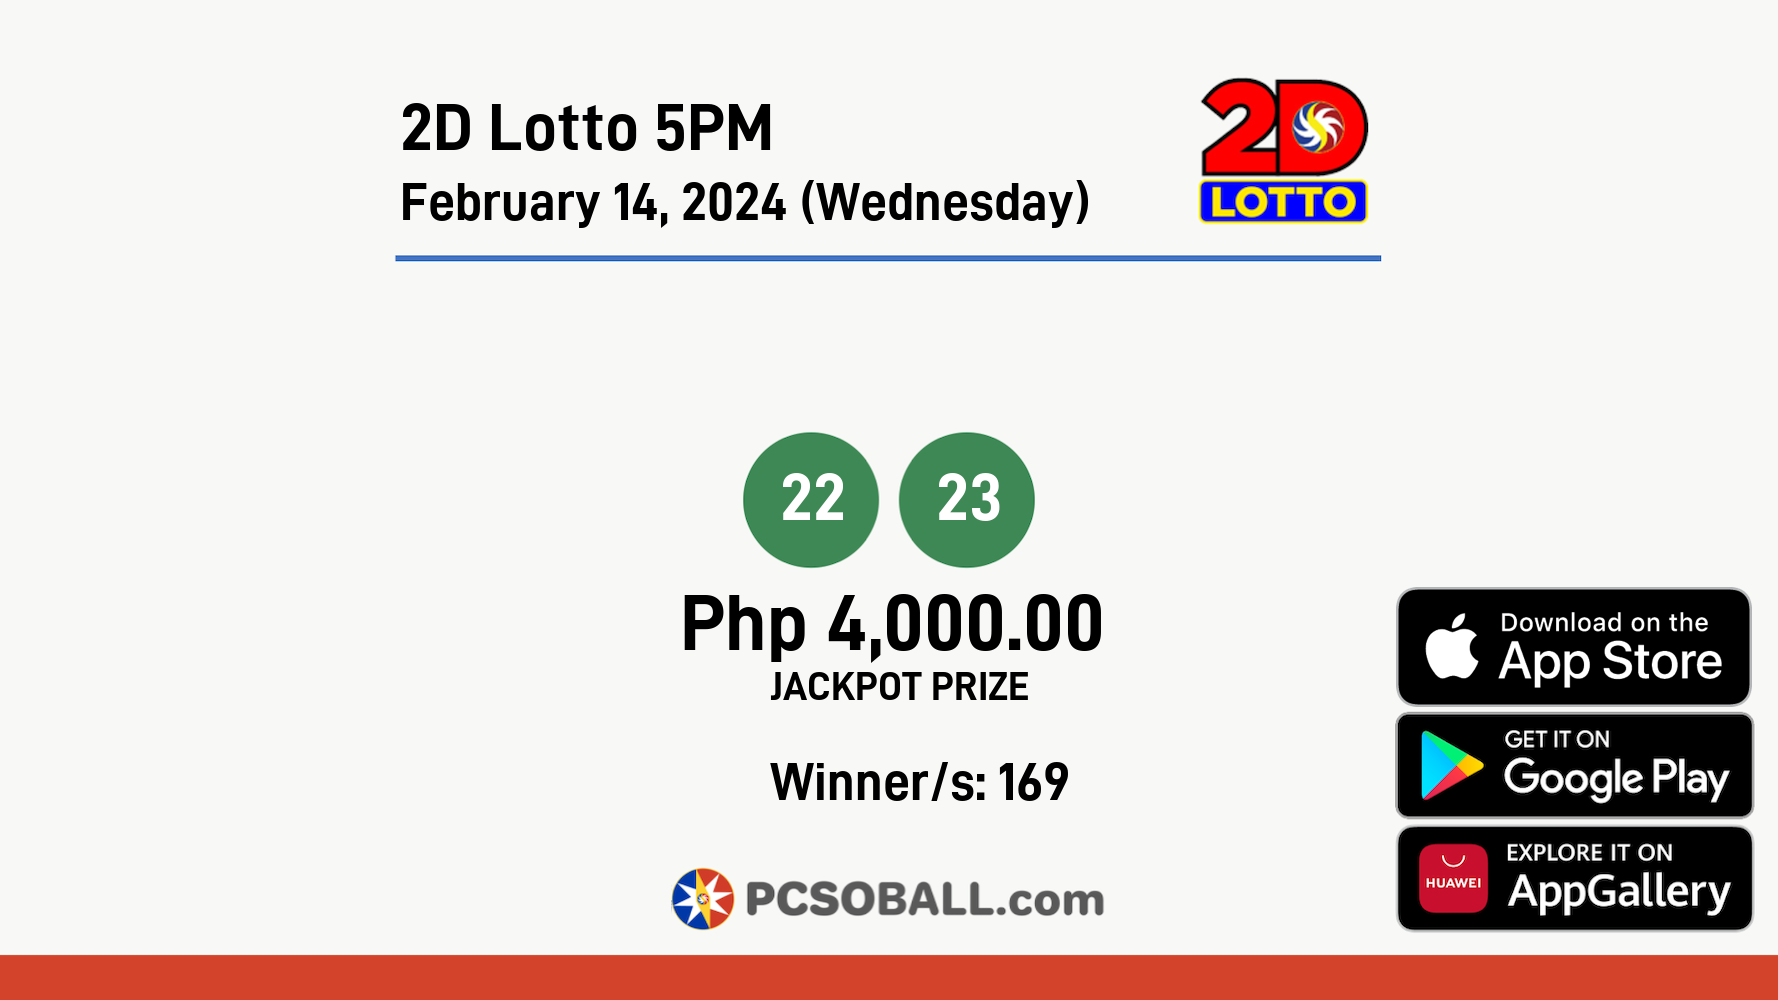 2D Lotto 5PM February 14, 2024 (Wednesday) Result